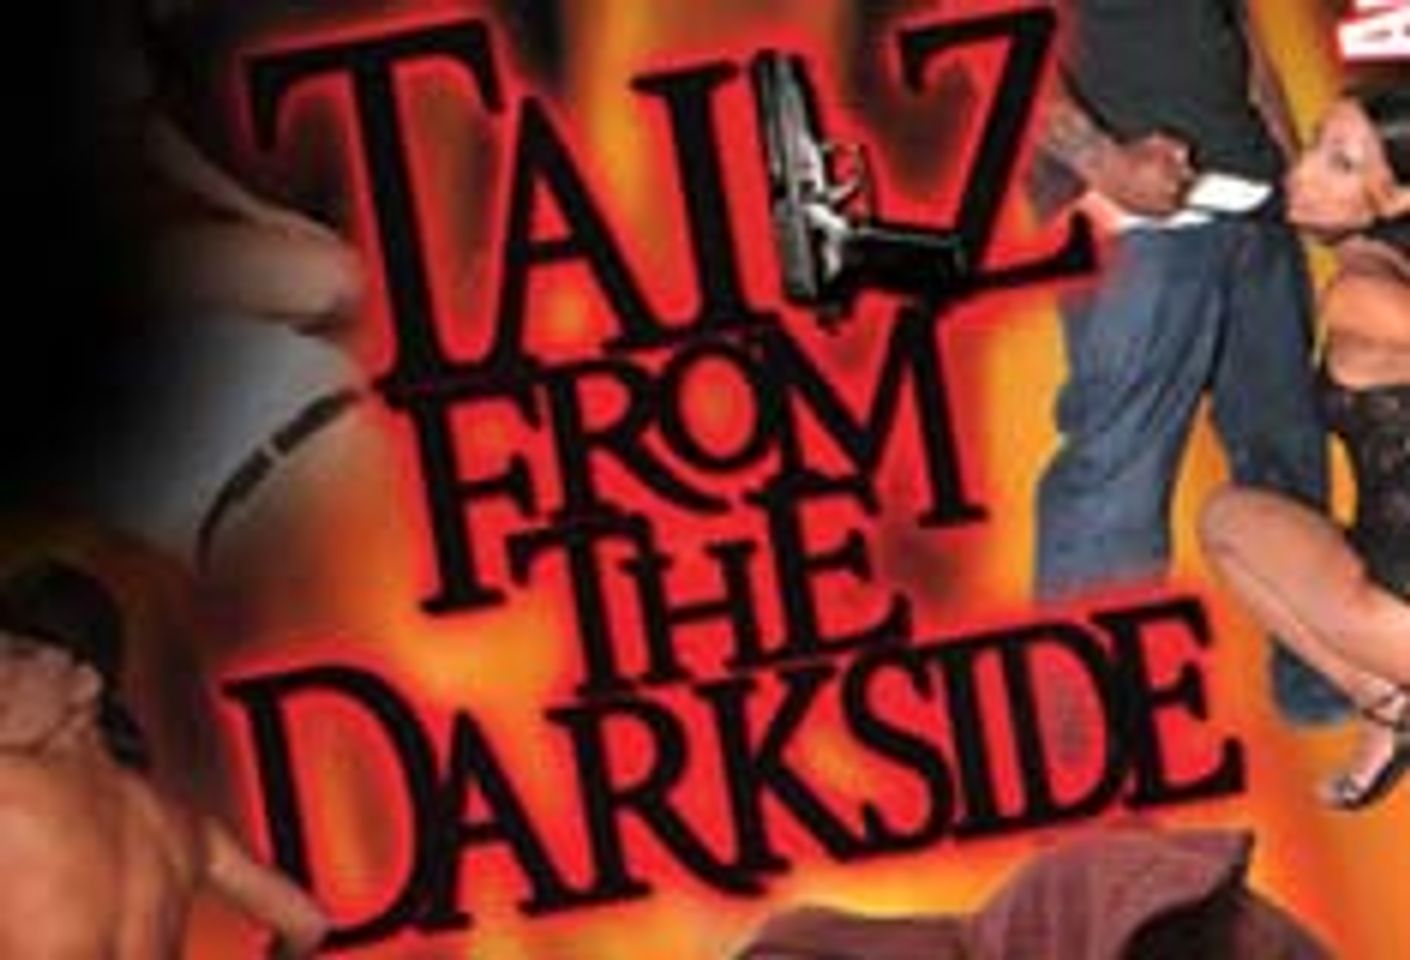 <i>Tailz from the Darkside</i> Wins Best Ethnic Release - Black